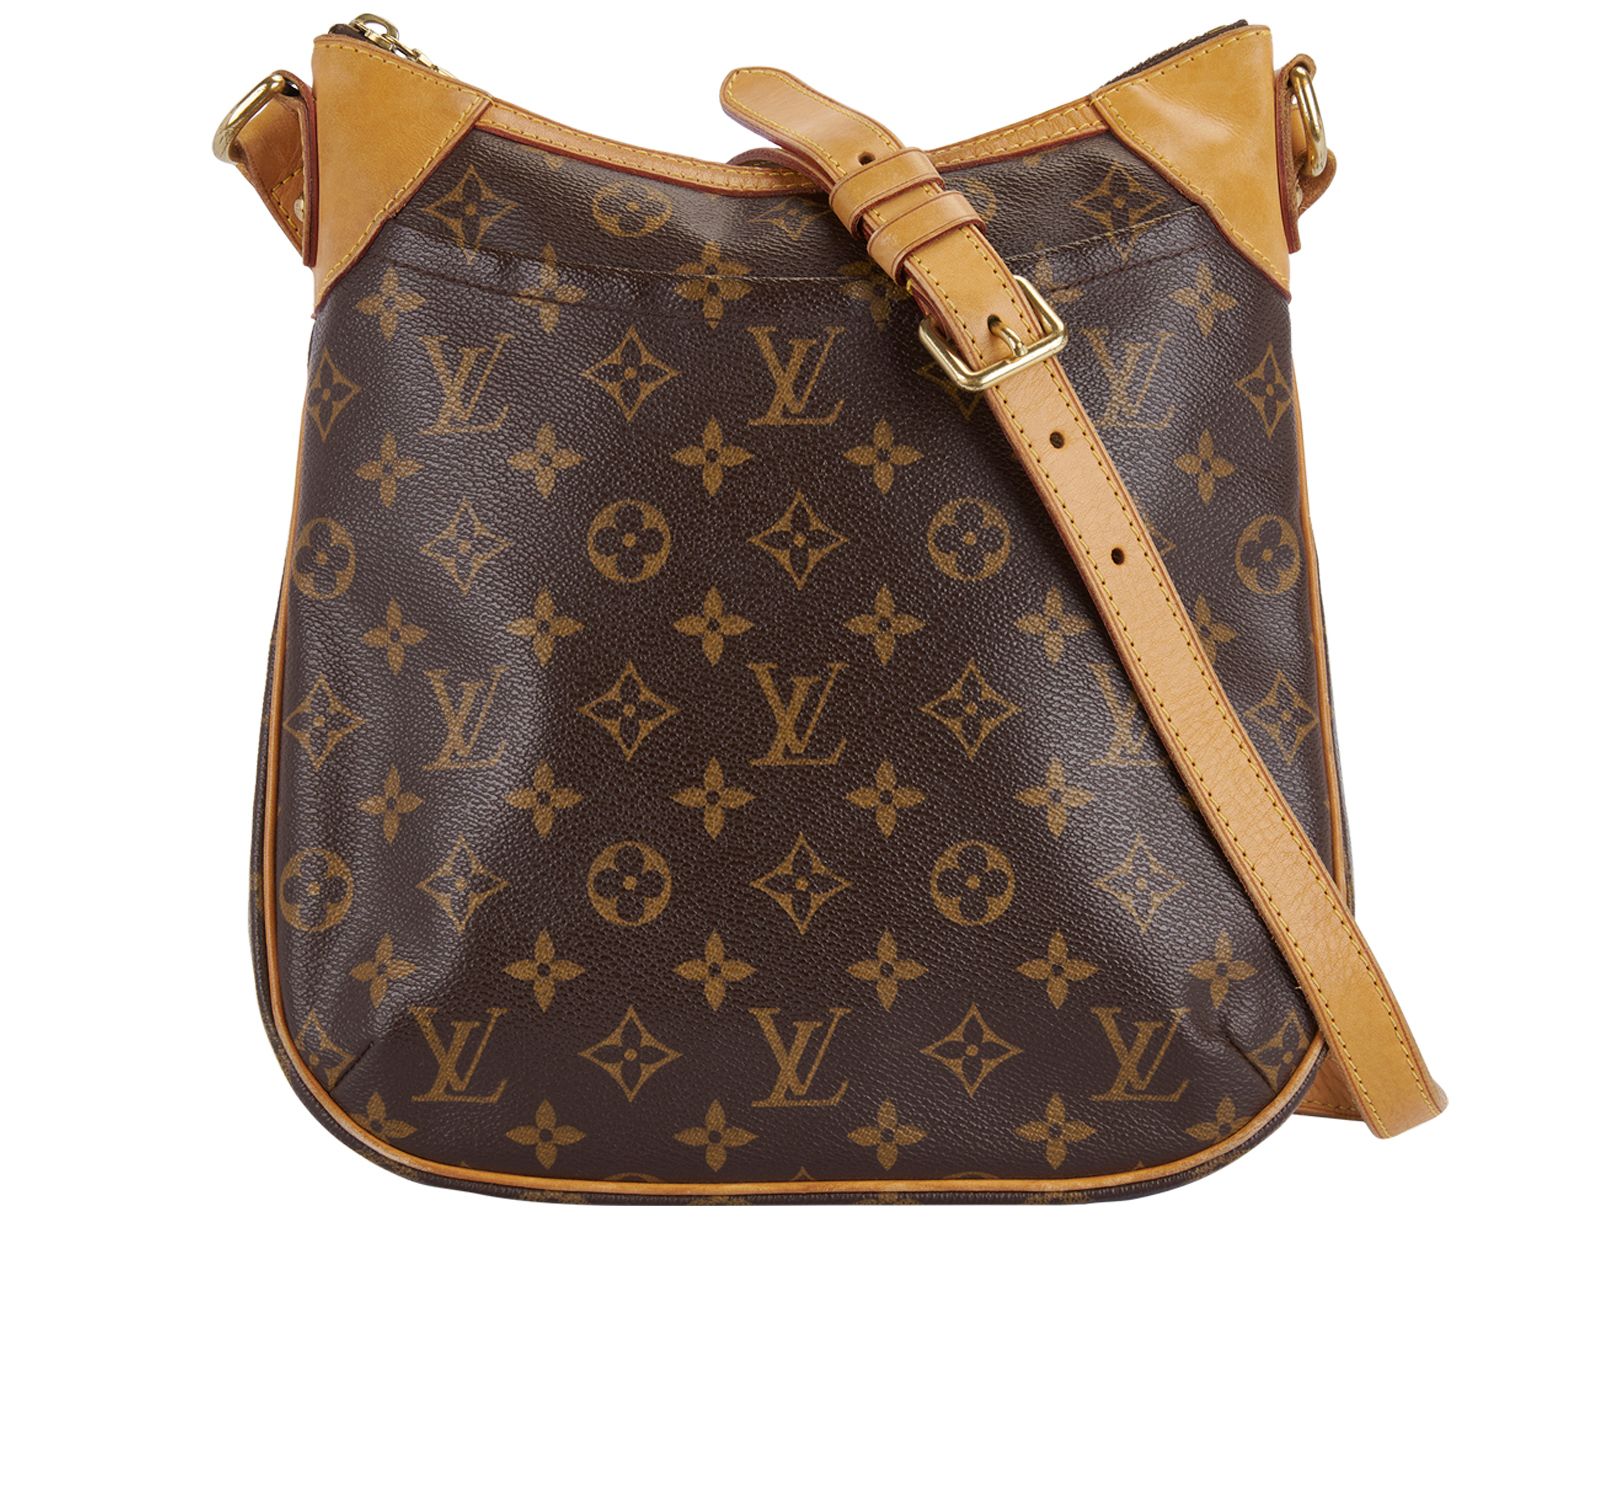 Thoughts on Odeon pm? : r/Louisvuitton